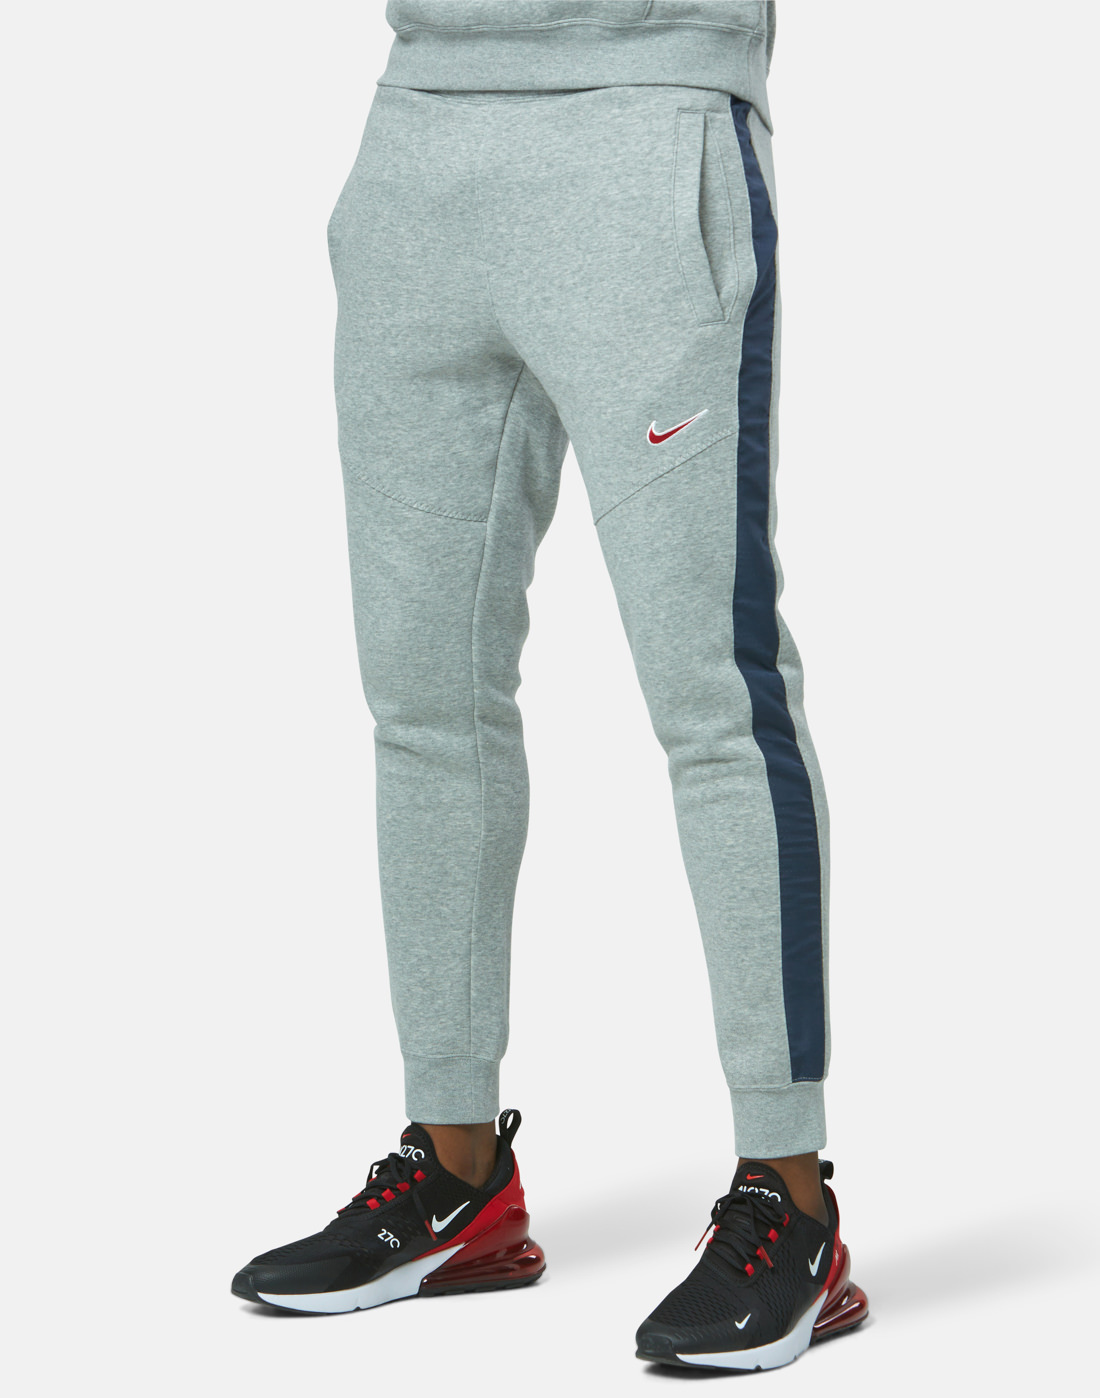 Nike Mens Sport Pack Pants - Grey | Life Style Sports IE